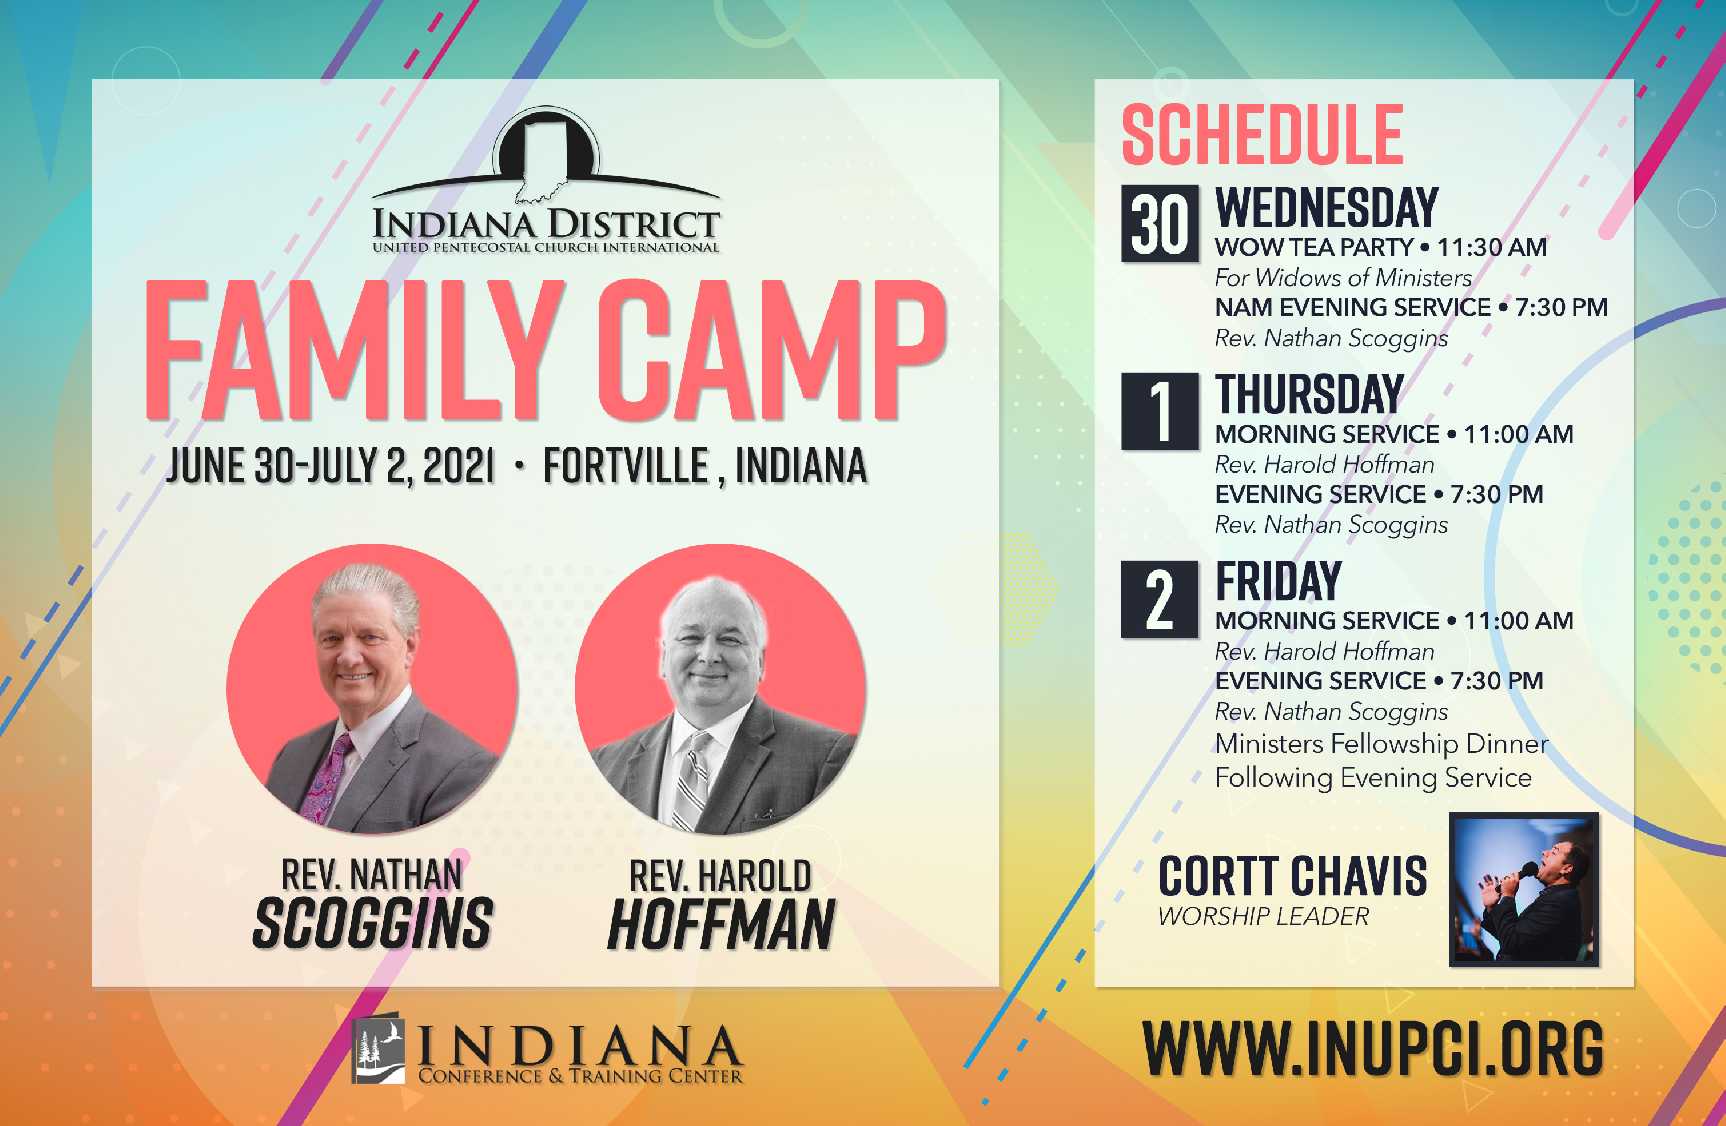 Advertisements - Indiana District UPCI